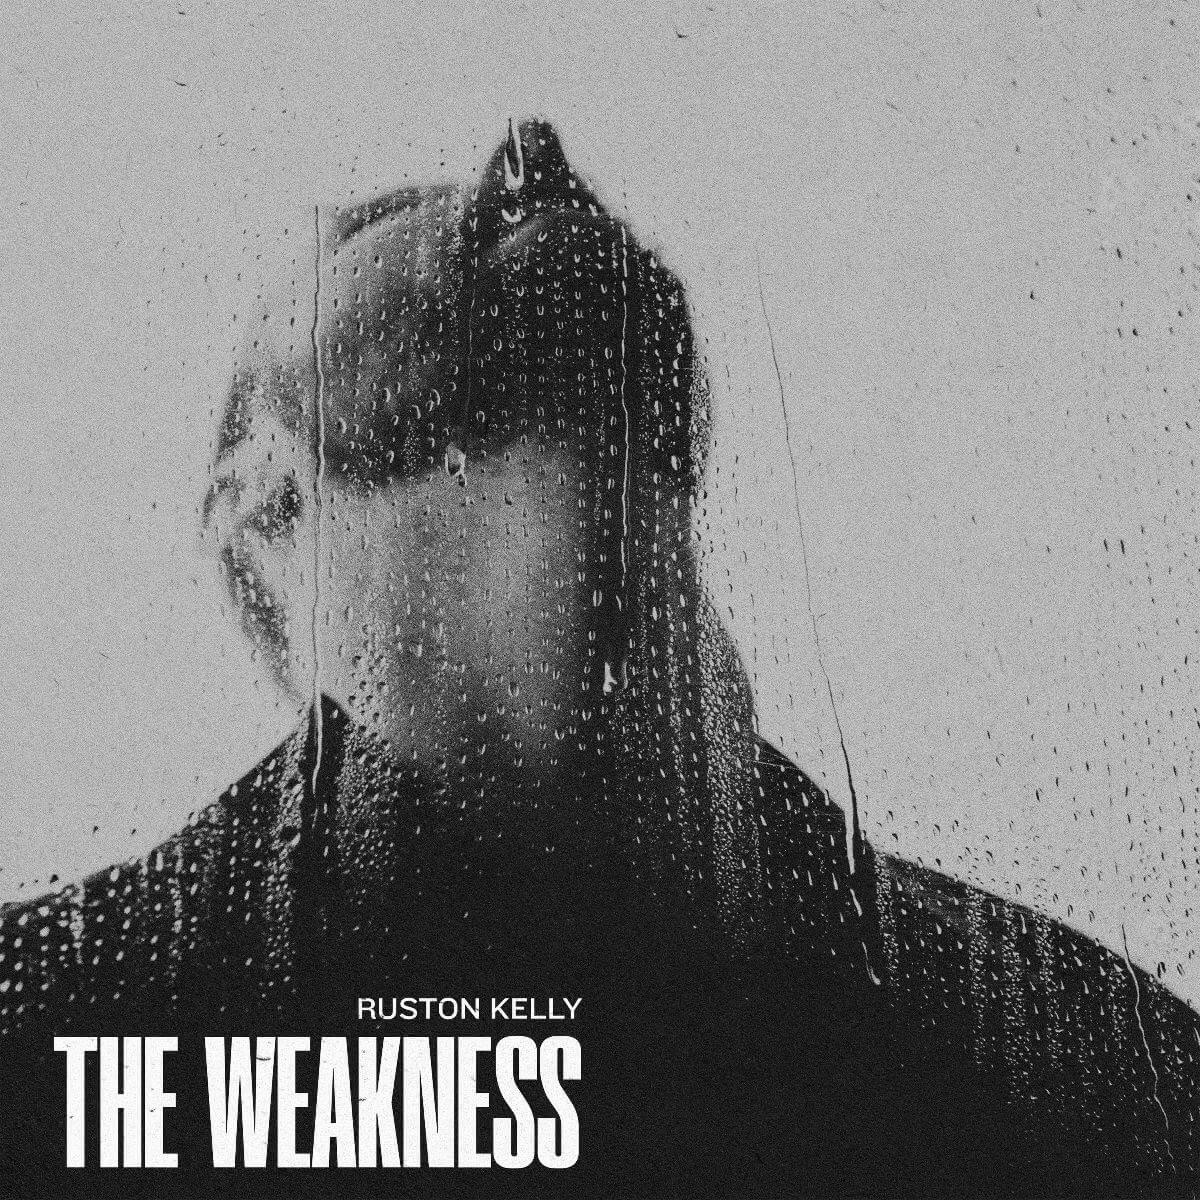 The Weakness by Ruston Kelly album review by Otis Cohan Moan for Northern Transmissions